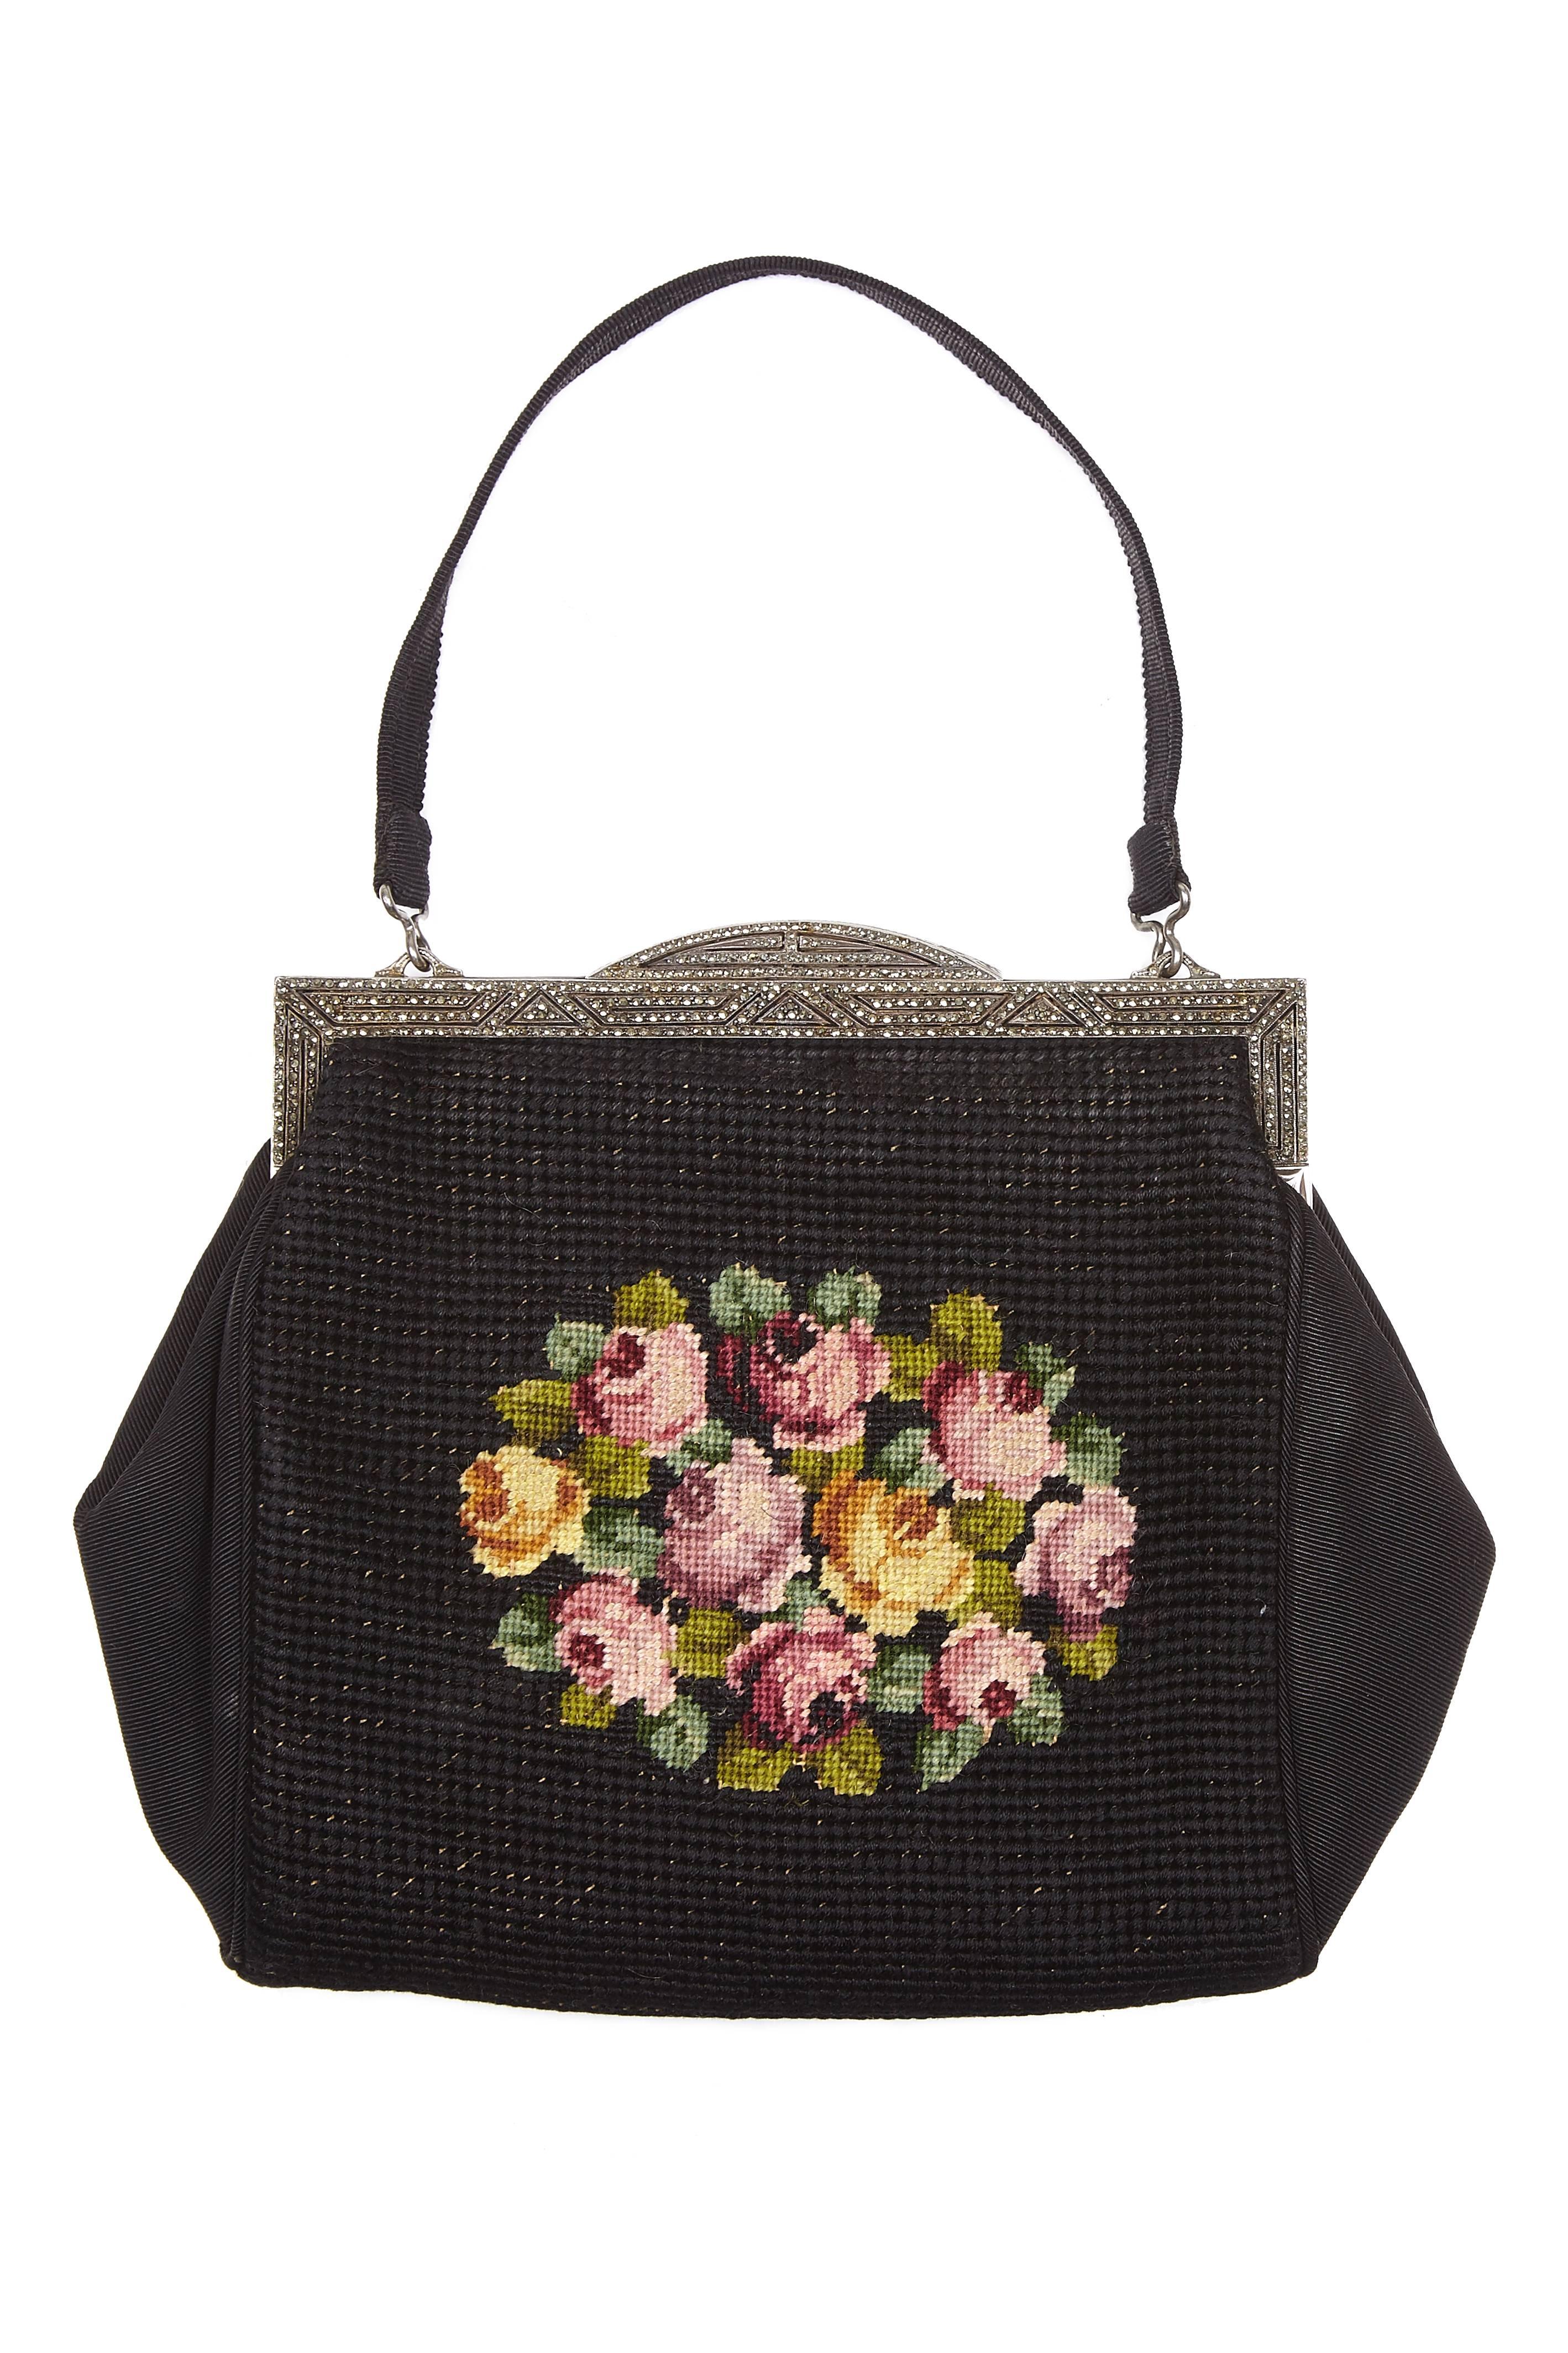 Exceptional art deco black grosgrain fabric and tapestry bag with hand-stitched floral needlework motive which features on both sides.  The frame is solid sterling silver with import marks for London 1937 - 1938.  The makers' mark is R L & Co.  The